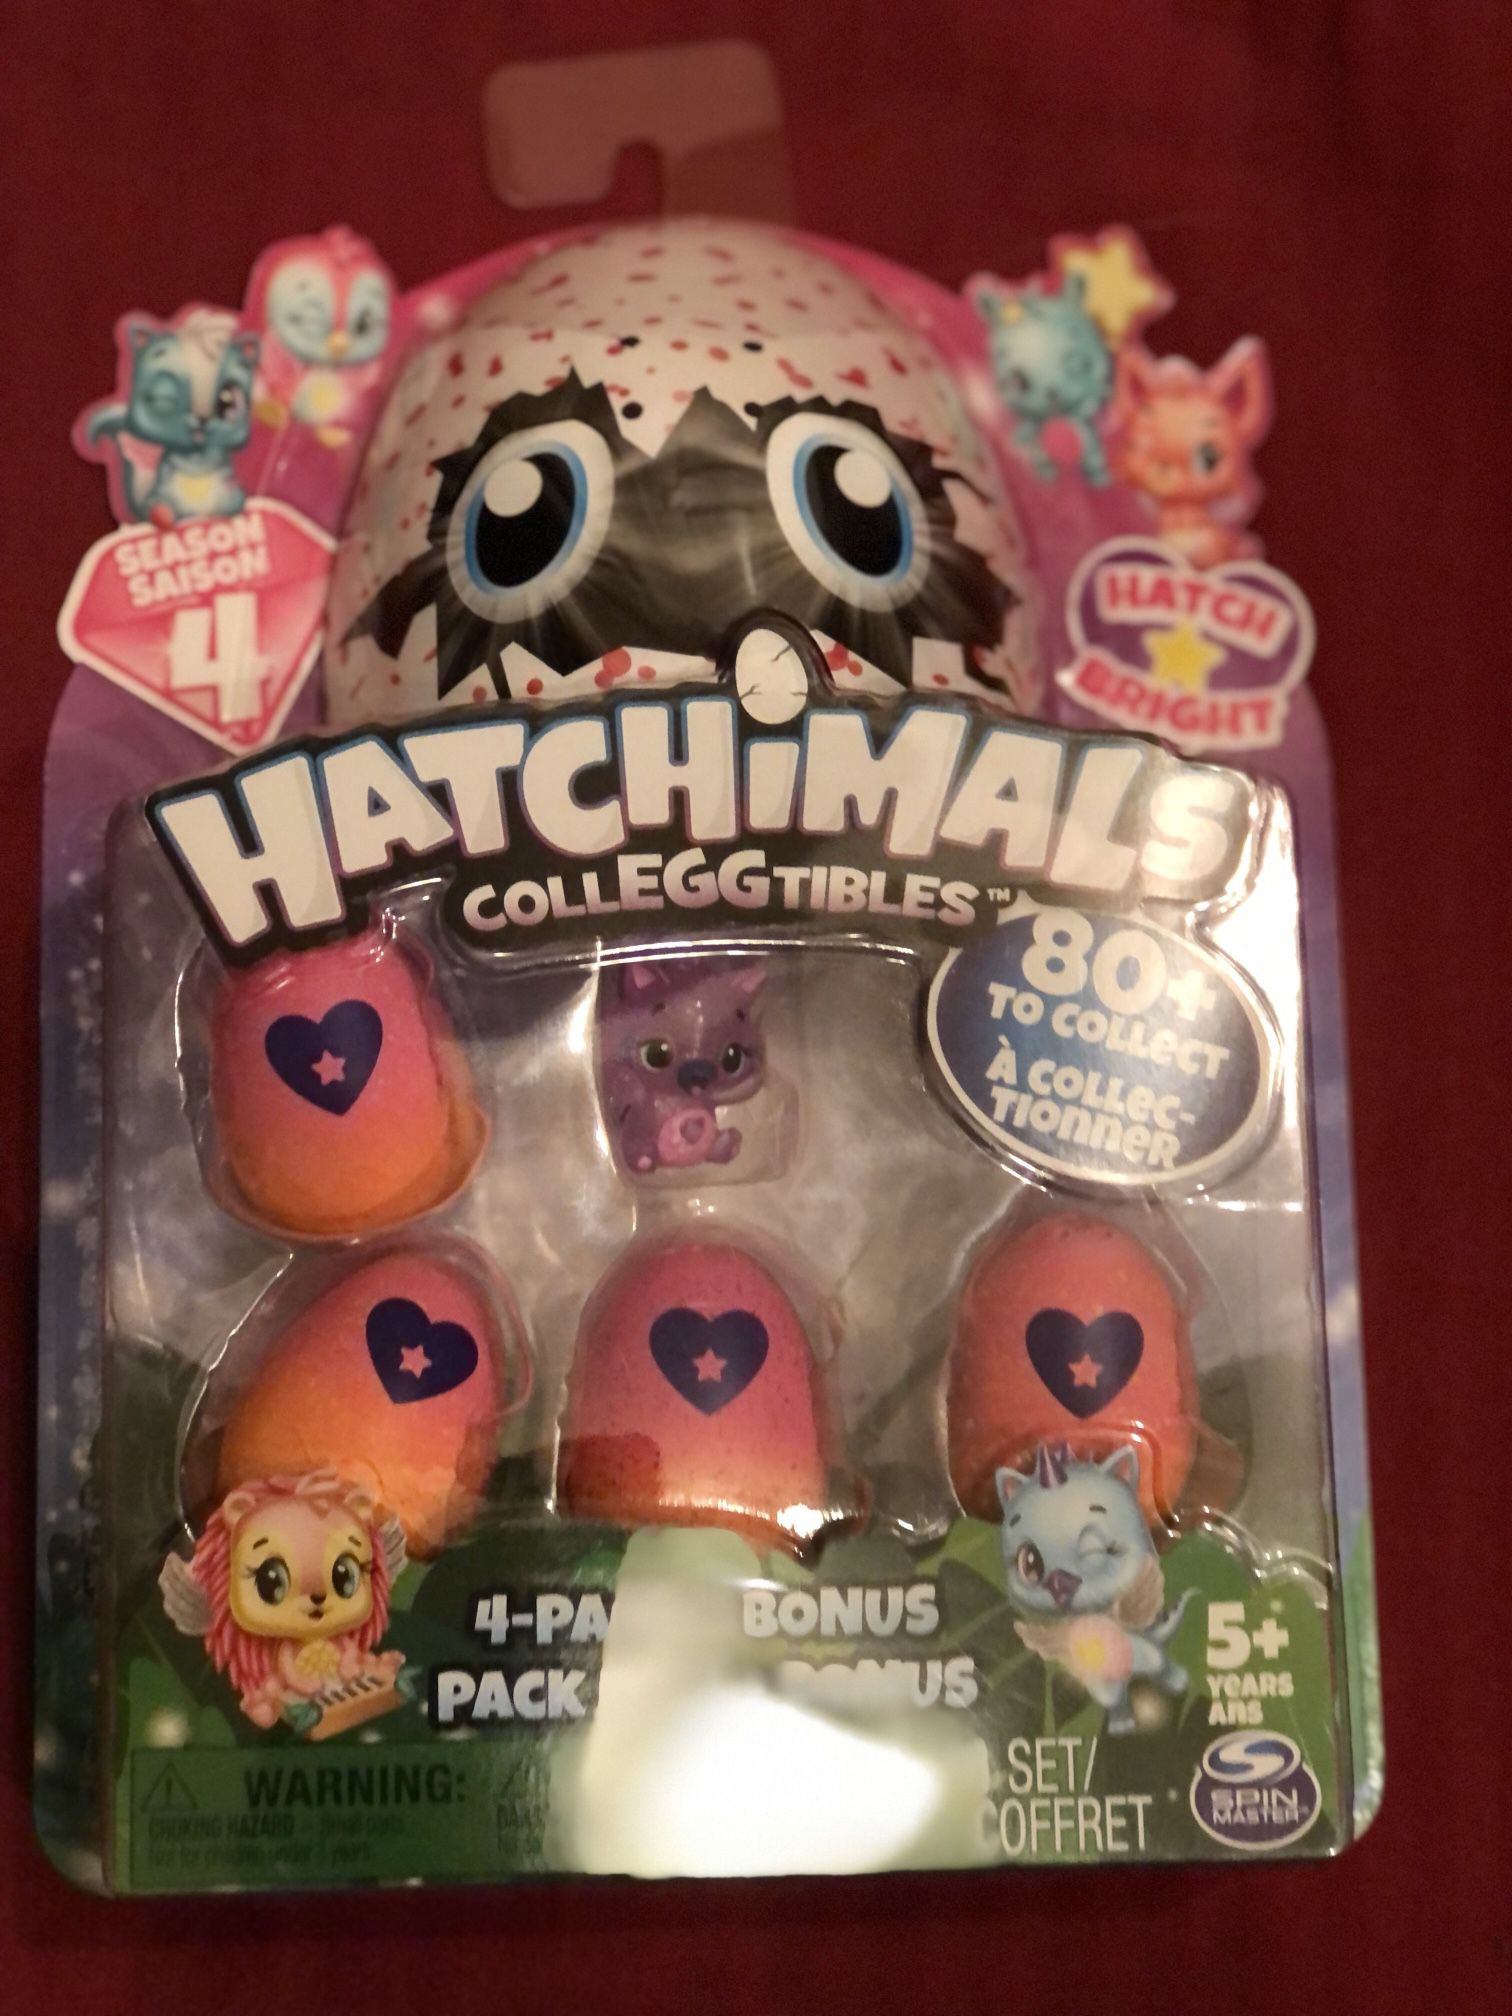 Hatchimals CollEGGtibles, 4 Pack + Bonus, Season 4 Hatchimals CollEGGtible, for Ages 5 and Up 